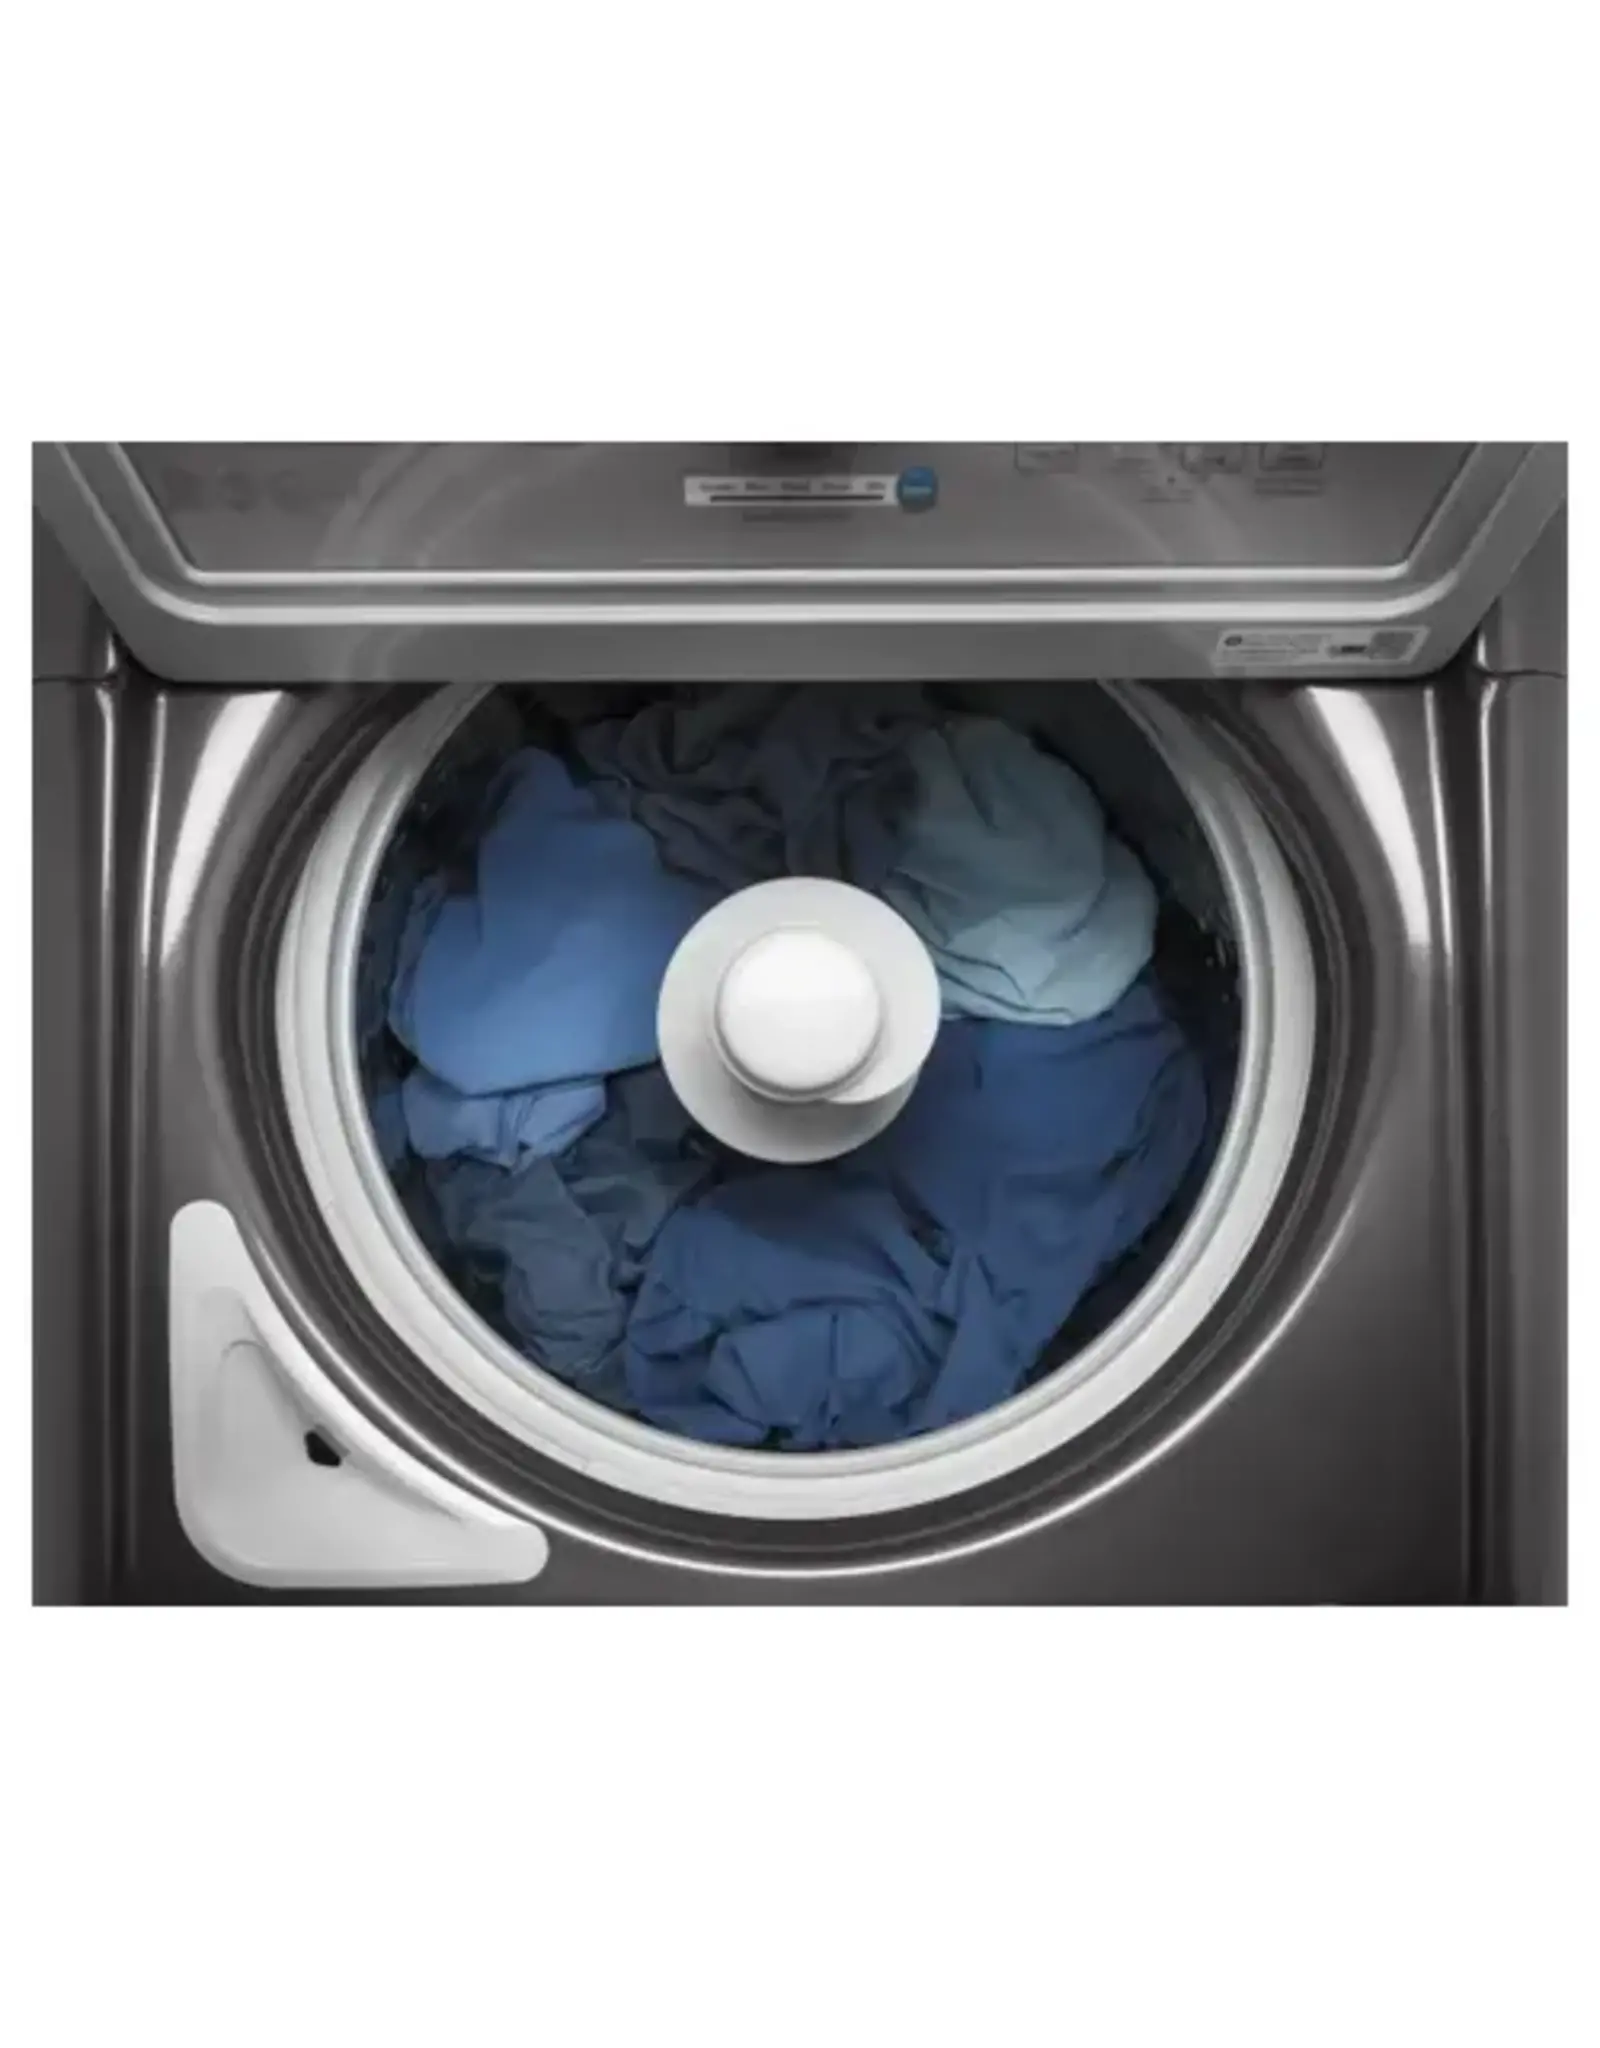 GE GTW685BPLDG-GE® ENERGY STAR® 4.5 cu. ft. Capacity Washer with Stainless Steel Basket